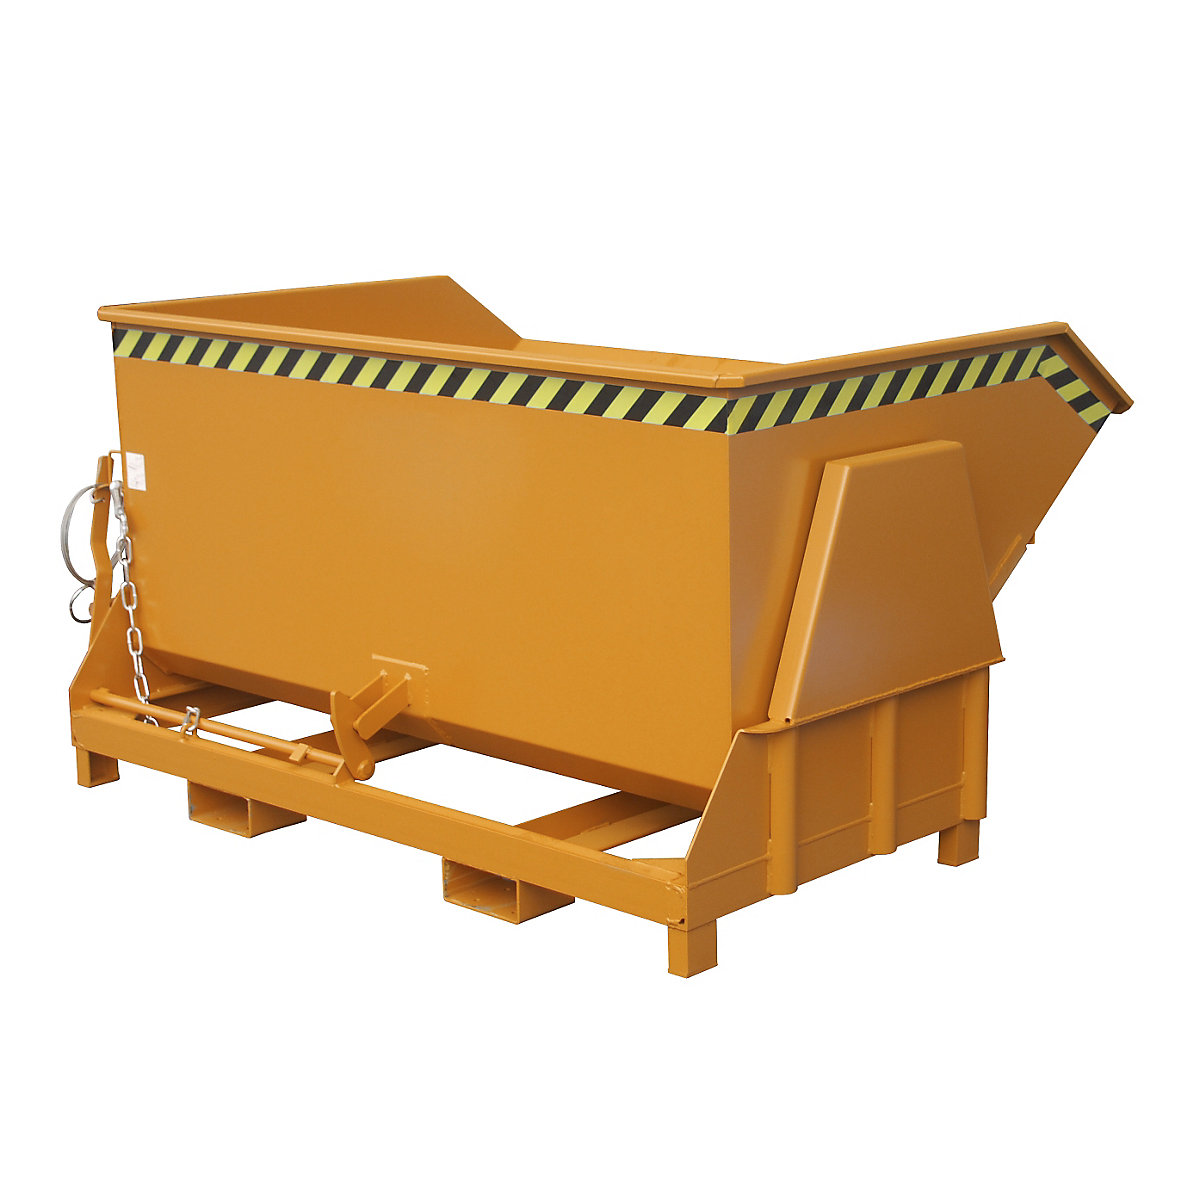 Tilting skip, standard overall height, without wheels – eurokraft pro, capacity 1.5 m³, painted orange RAL 2000-8